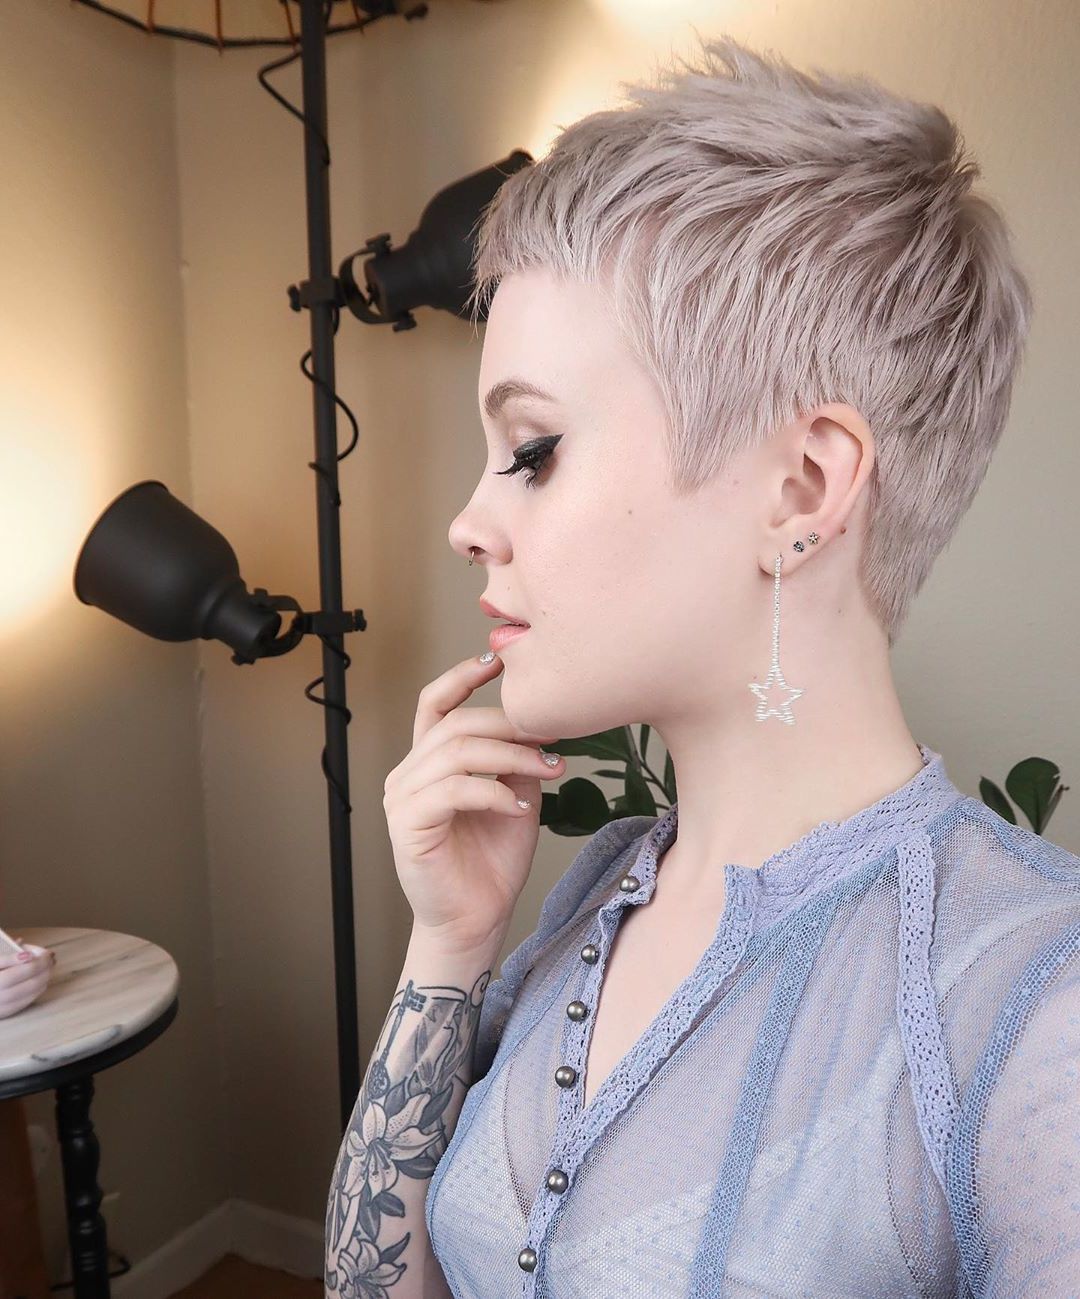 35 Best Pixie Cut Hairstyles For 2019 You Will Want To See Inside Messy Curly Blonde Pixie Bob Haircuts (View 19 of 20)